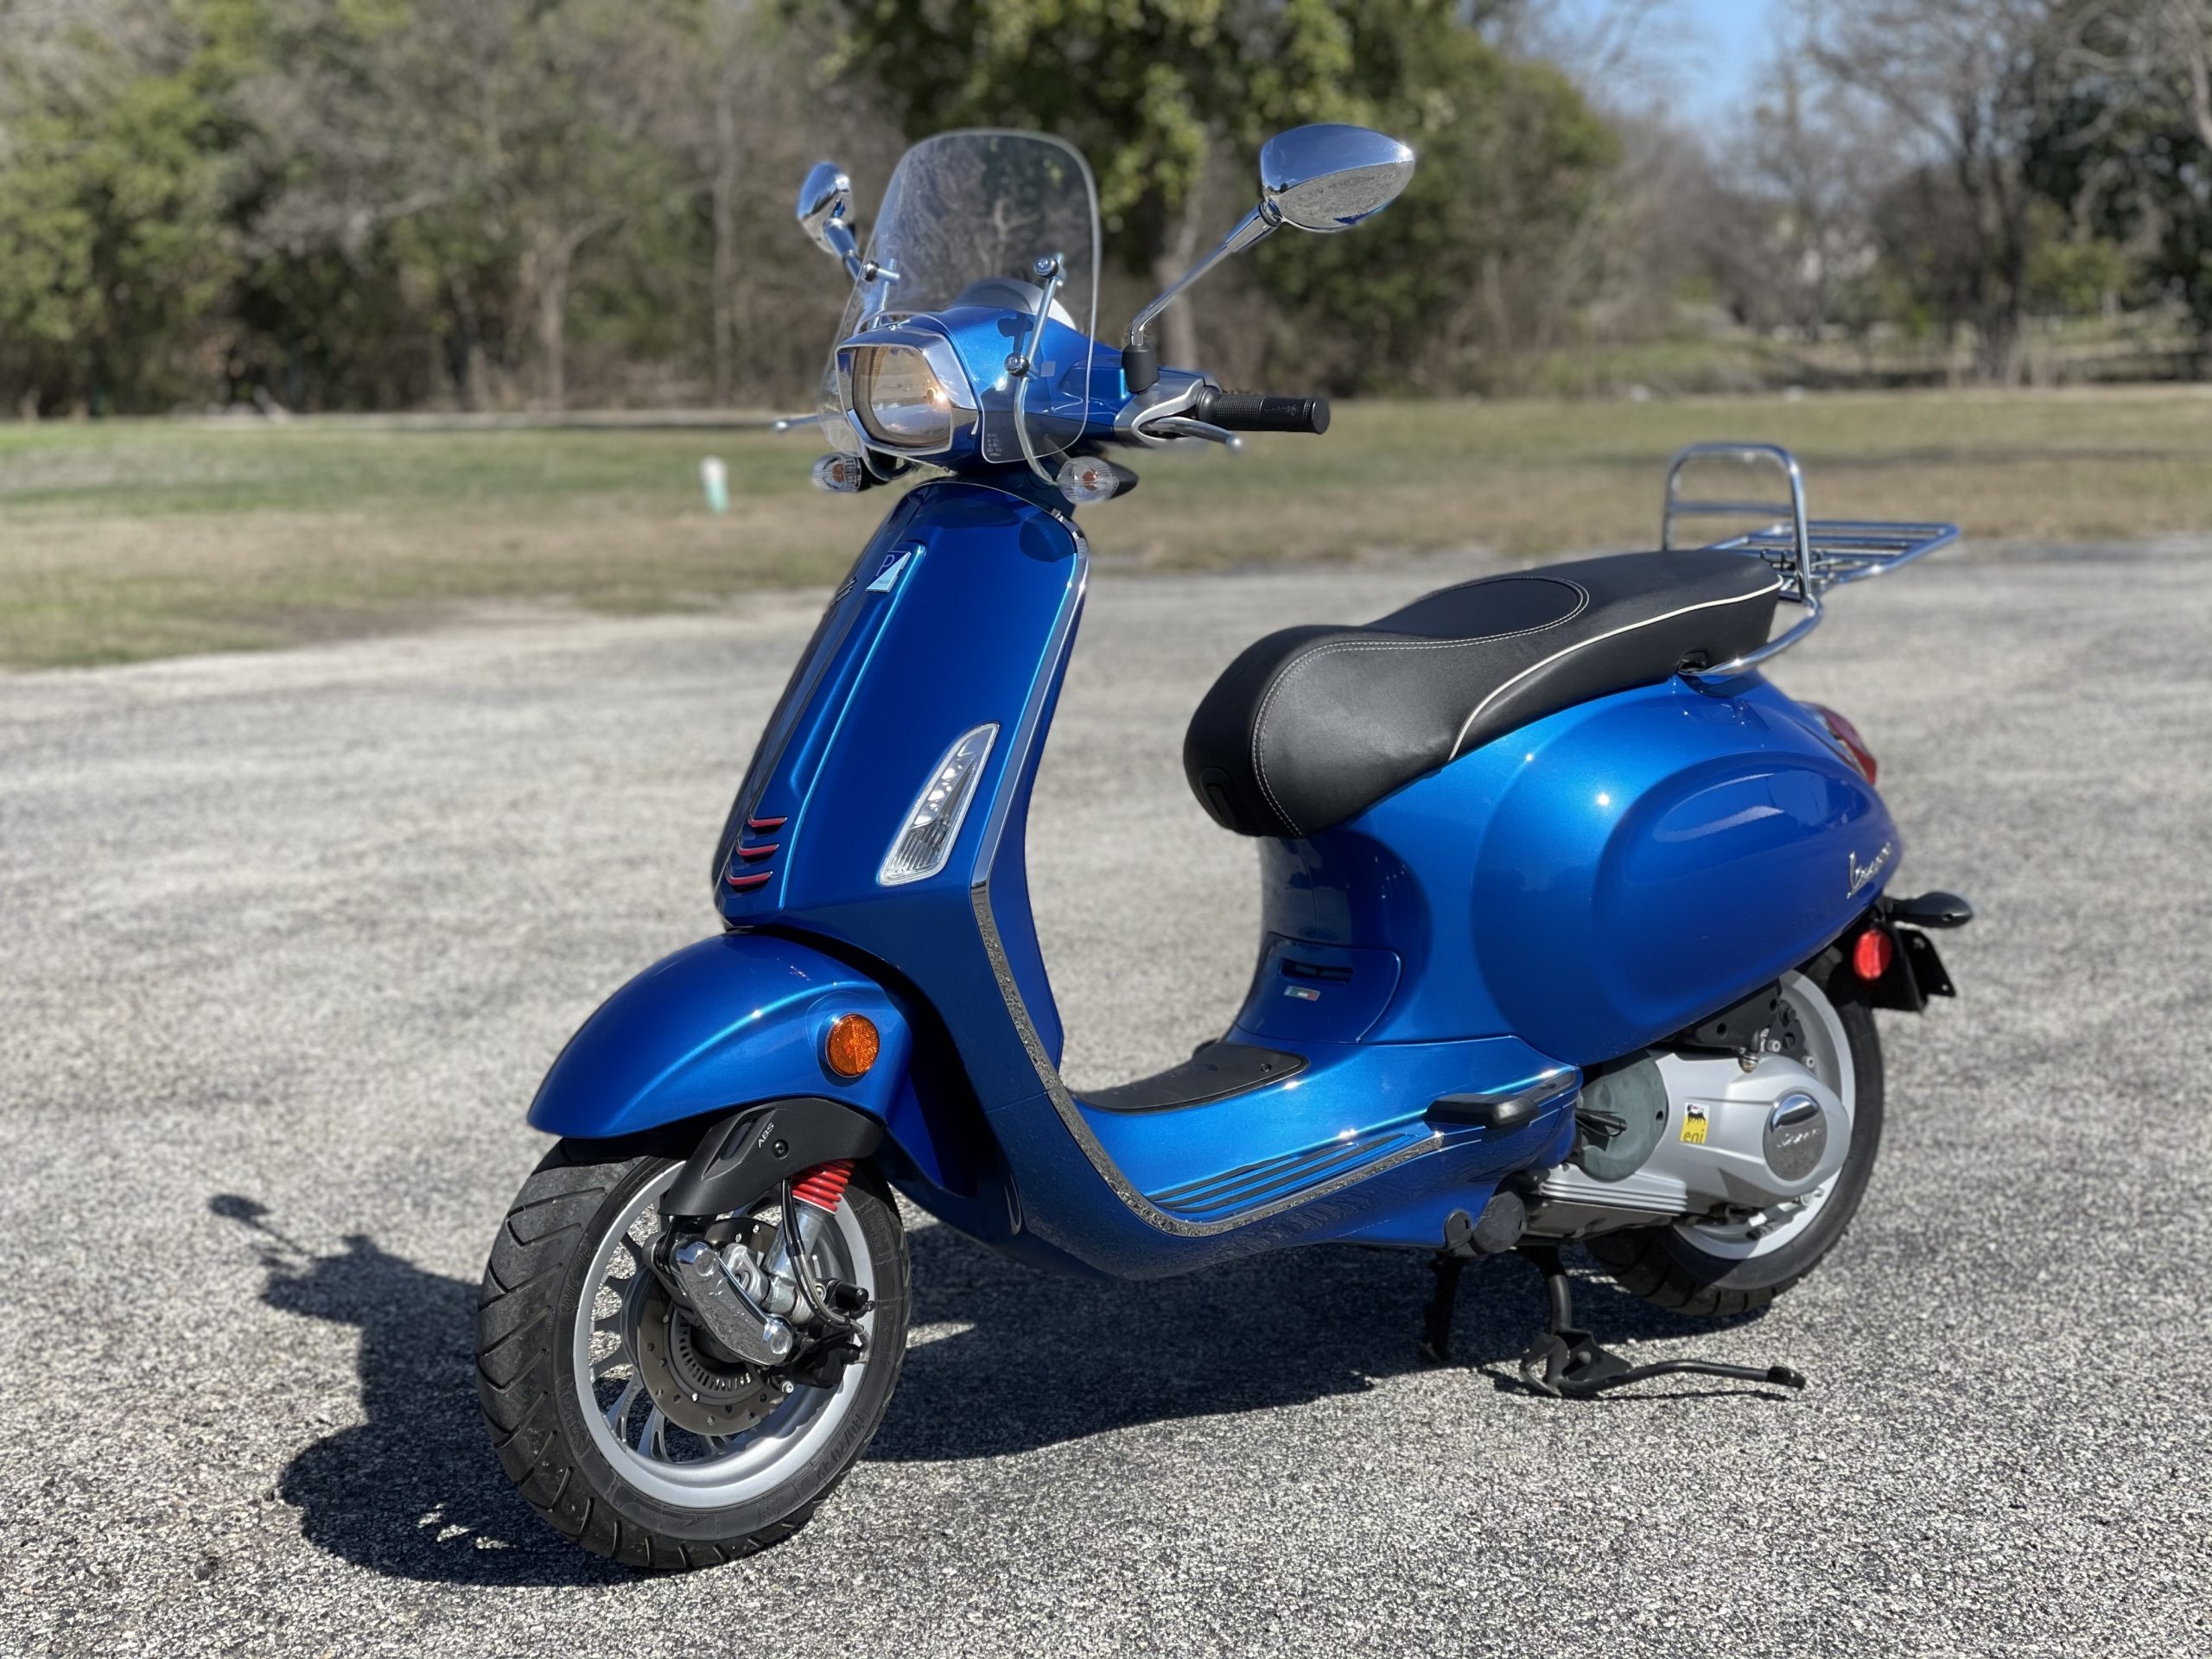 Vespa Sprint 150, Sold at The Motorcycle Shop, Classy scooter, 2015 model, 2560x1920 HD Desktop